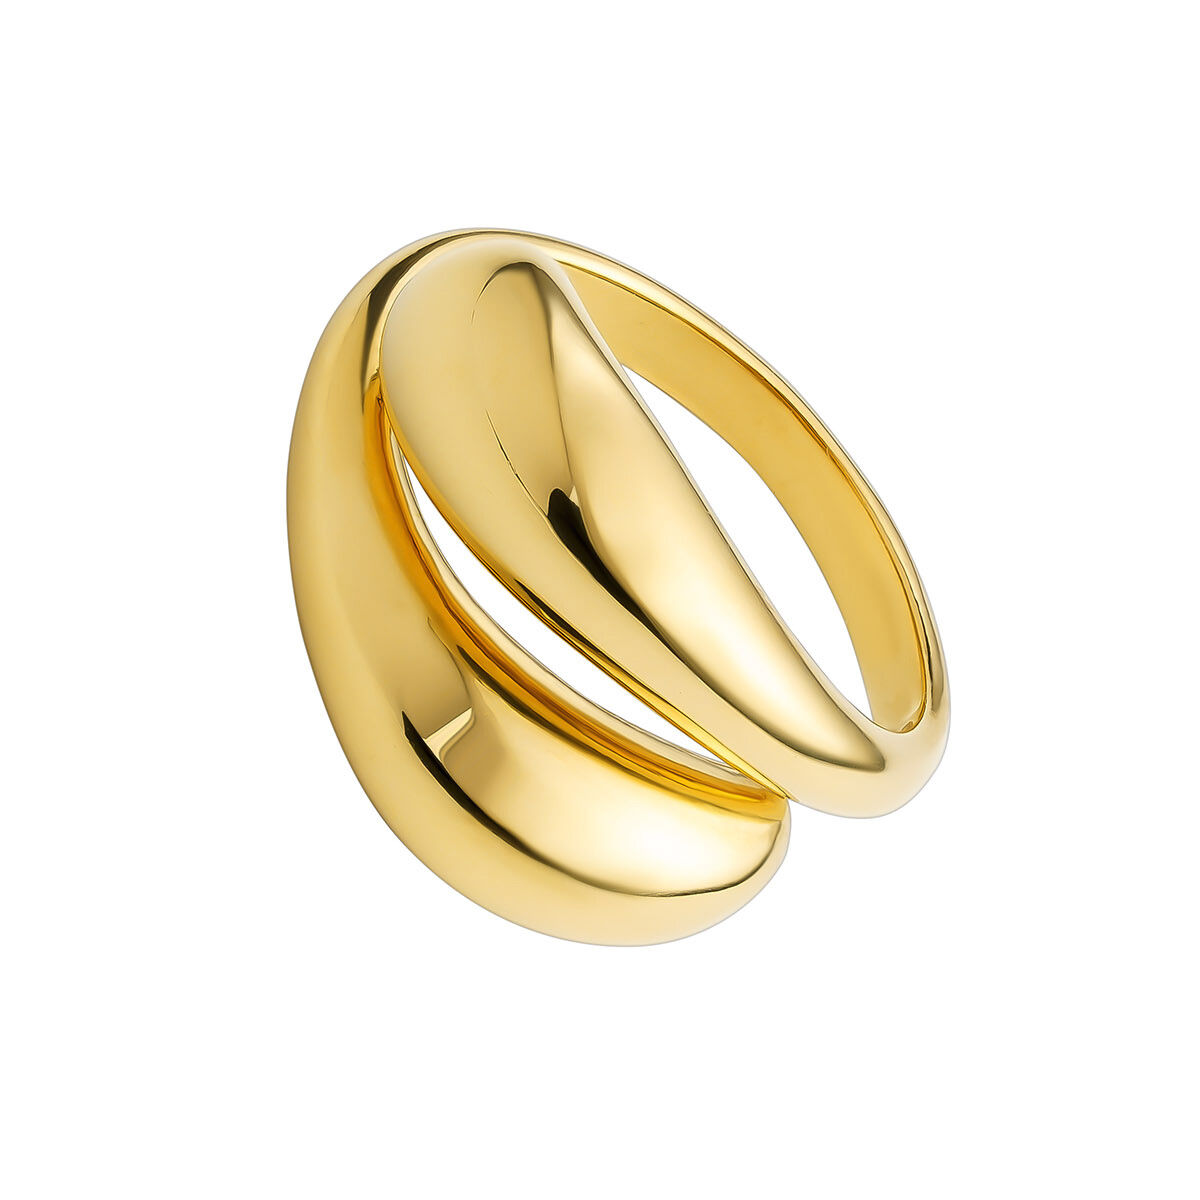 Convex spiral 18kt yellow gold-plated silver ring, J05223-02, mainproduct